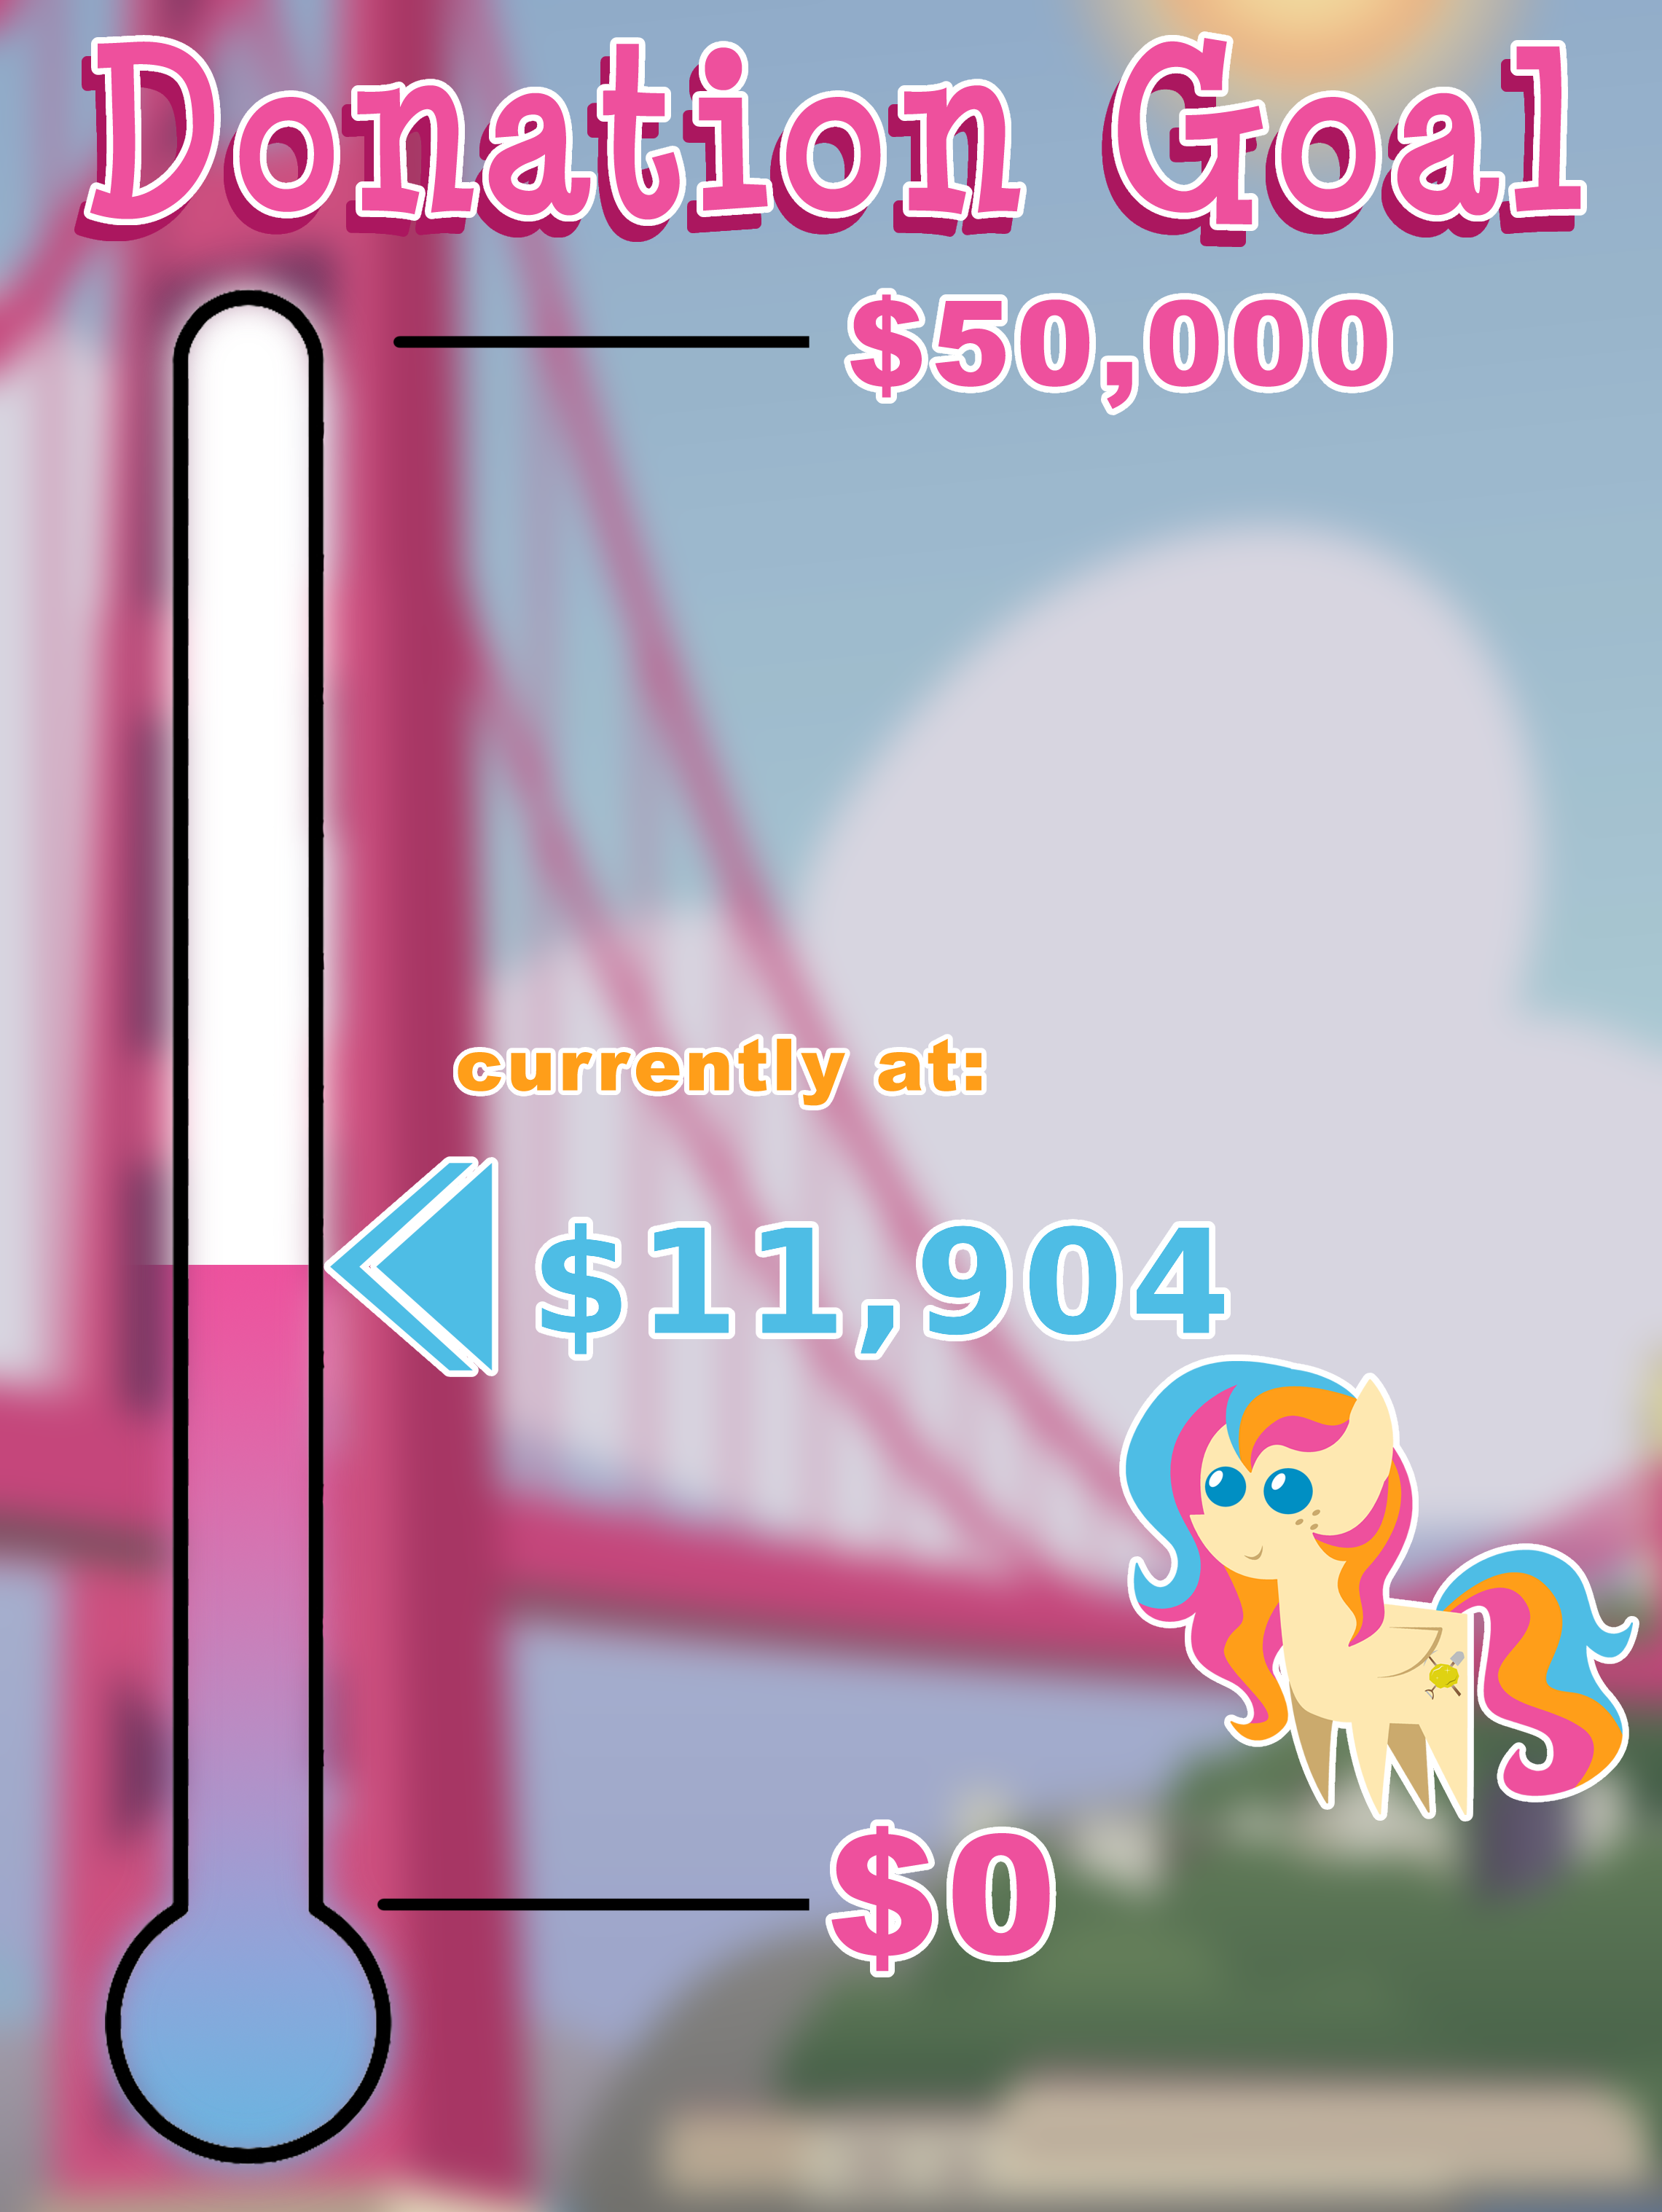 Donation Goal Update 01-25: $11,904 of $50,000